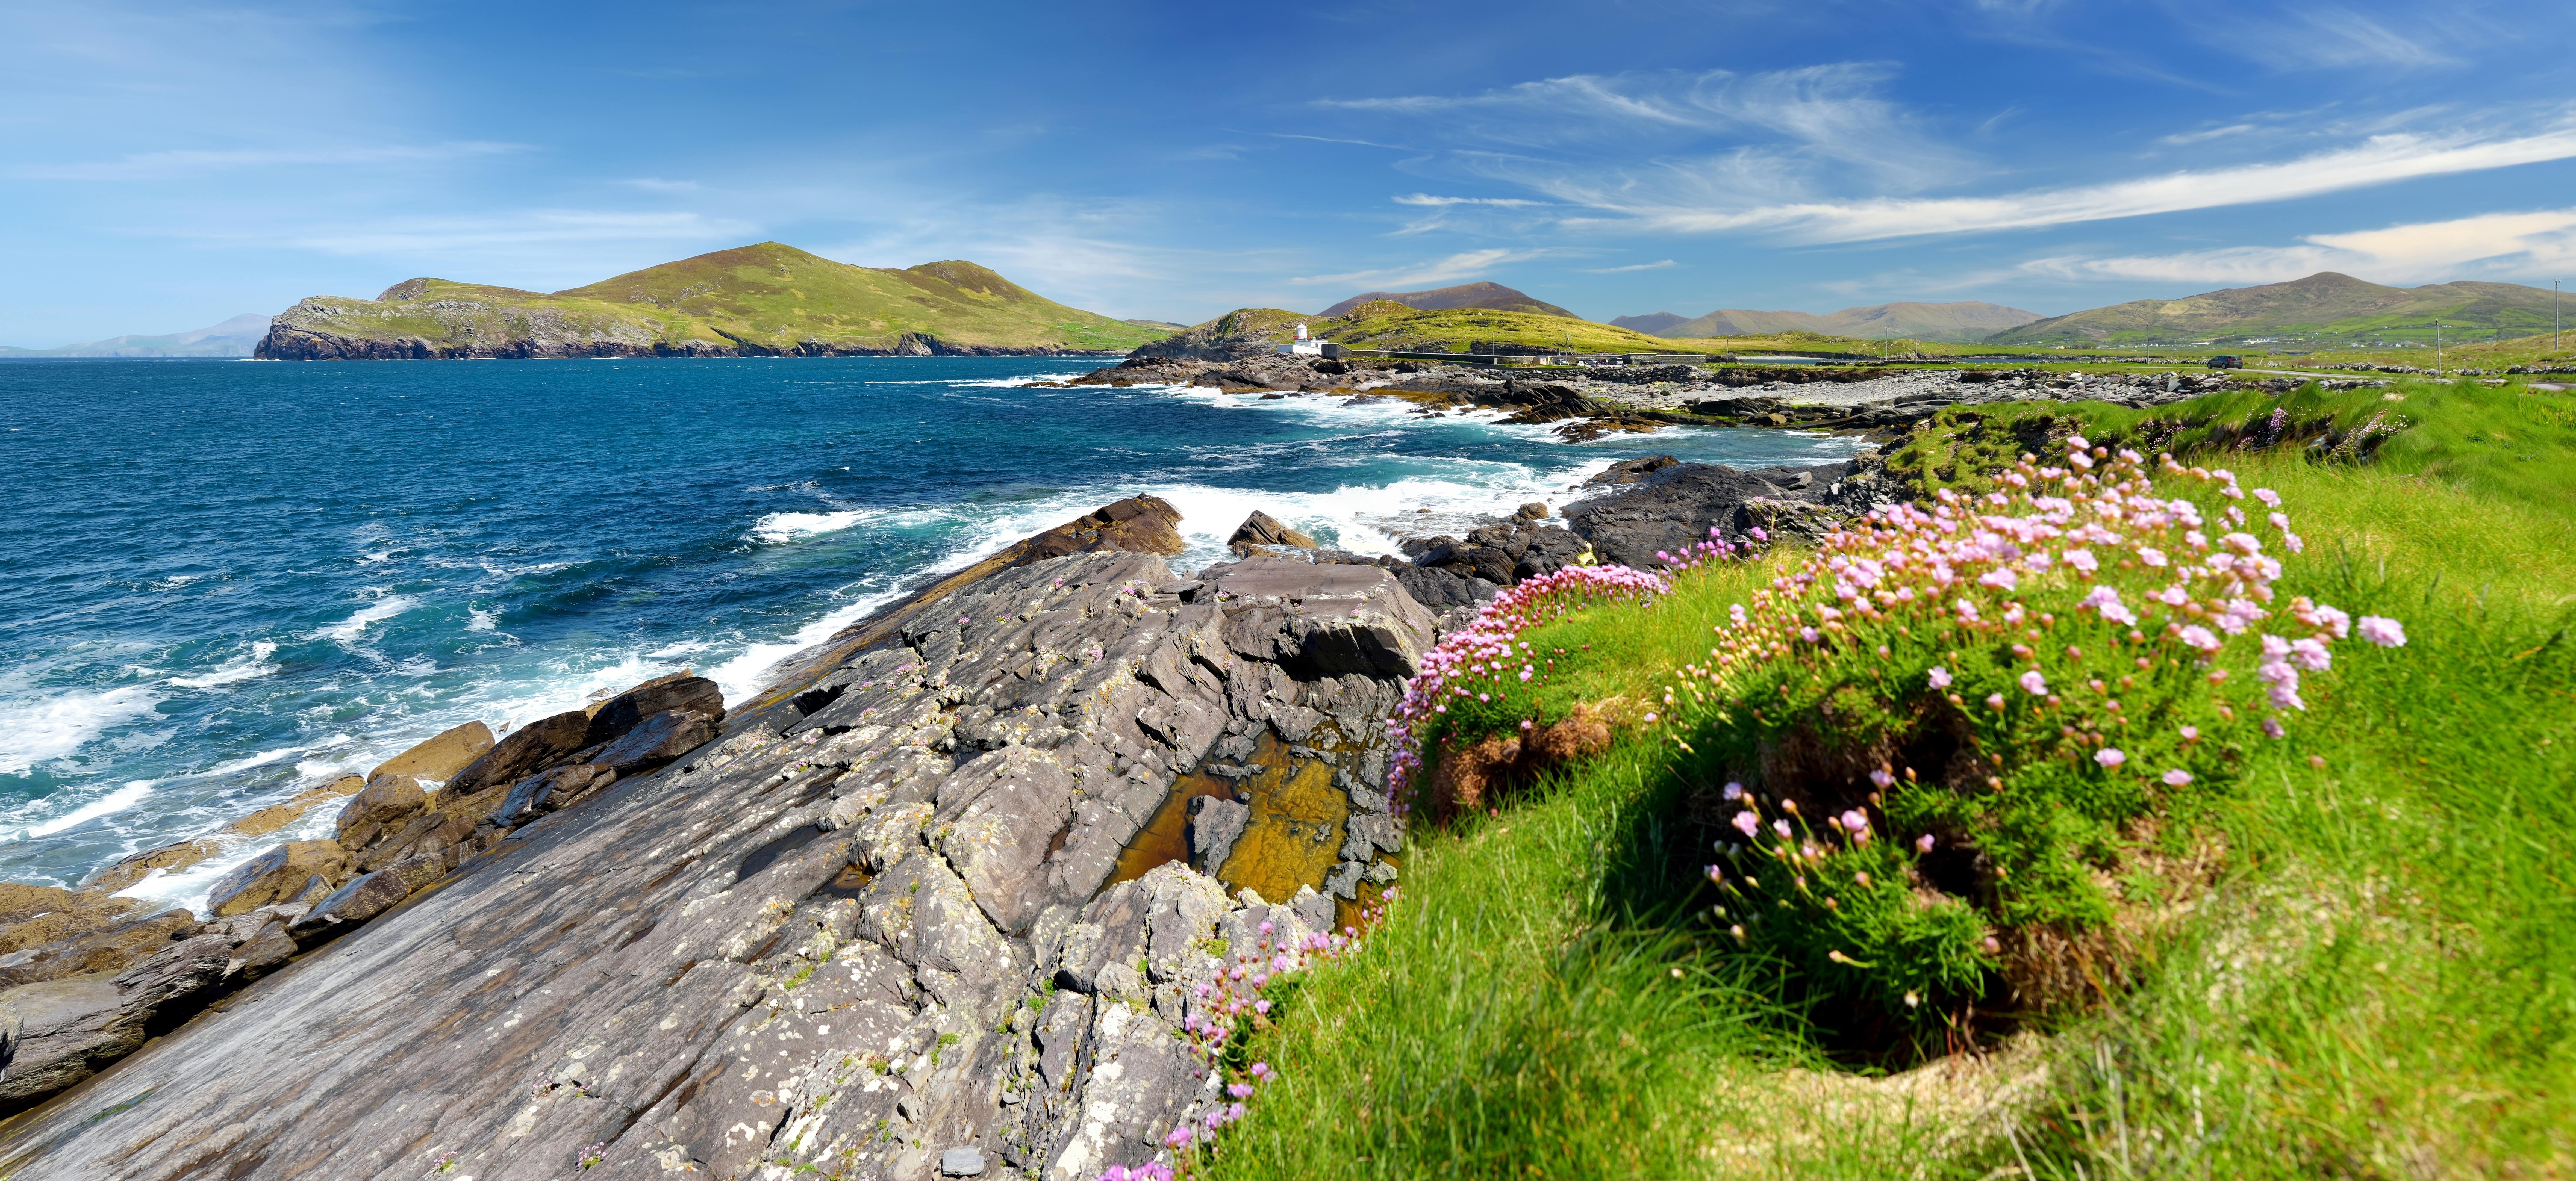 Things to Do This Summer on Valentia Island